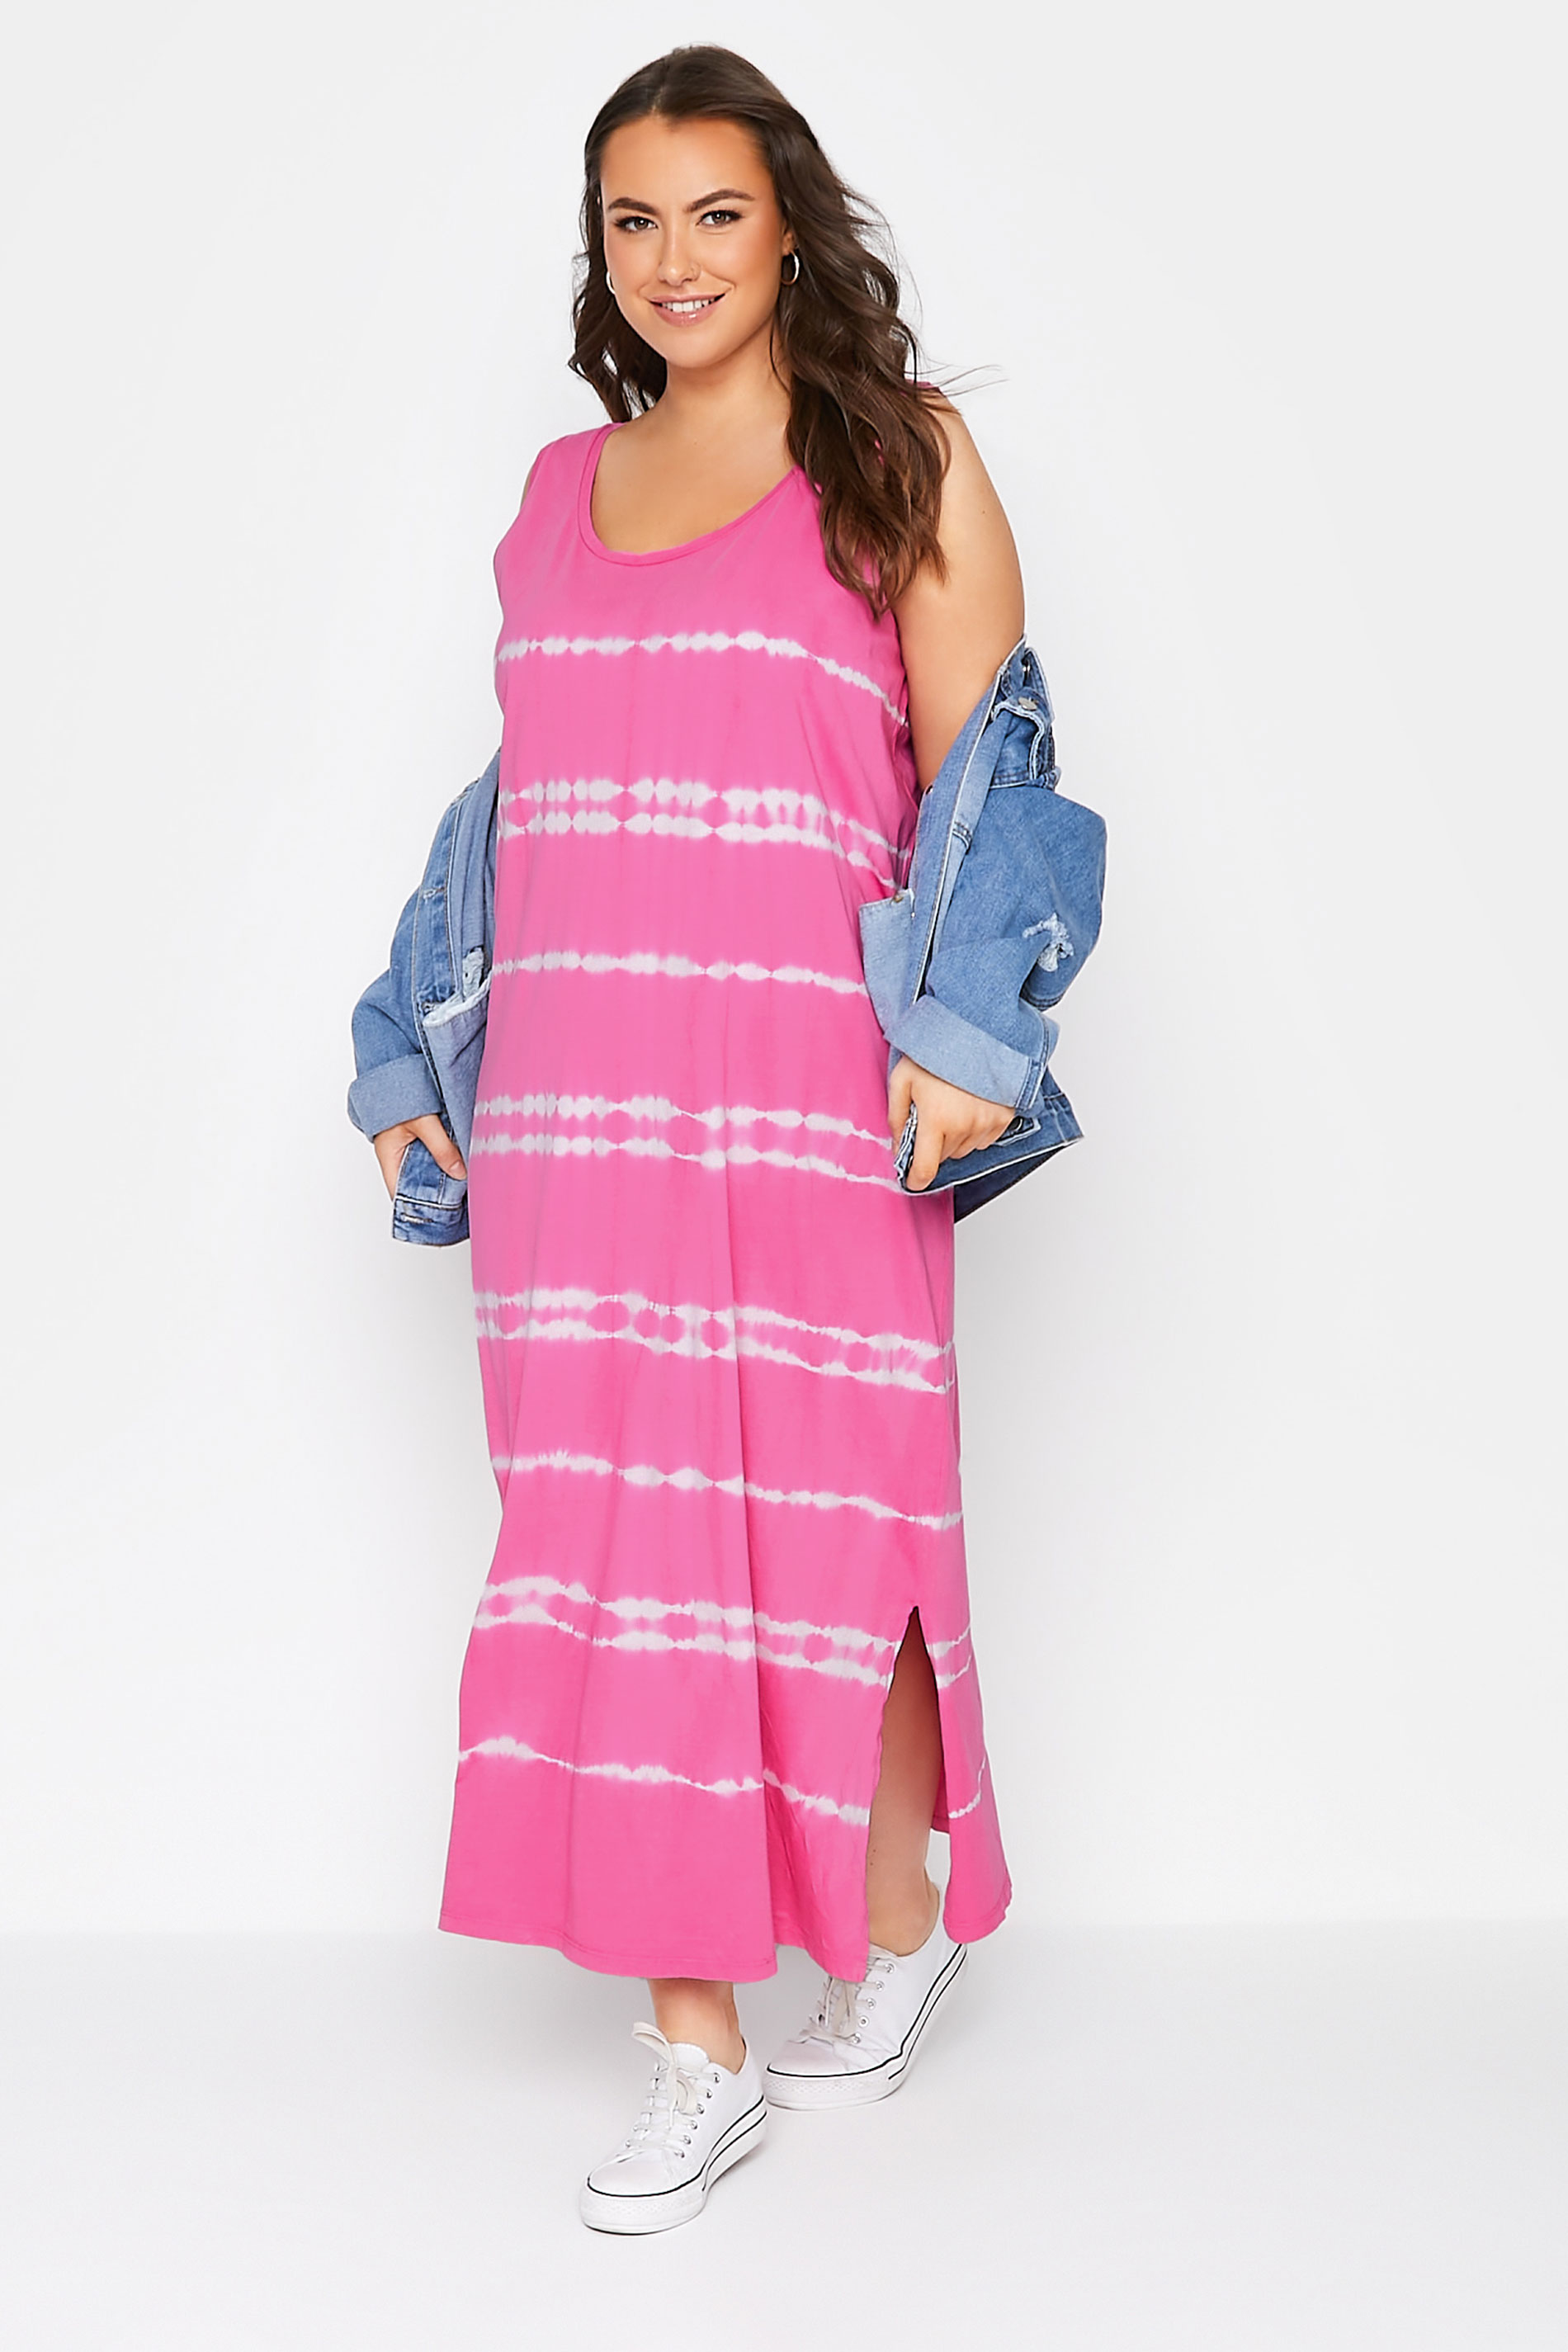 Robes Grande Taille Grande taille  Robes Longues | Robe Rose en Jersey Maxi Tie & Dye - WV39600